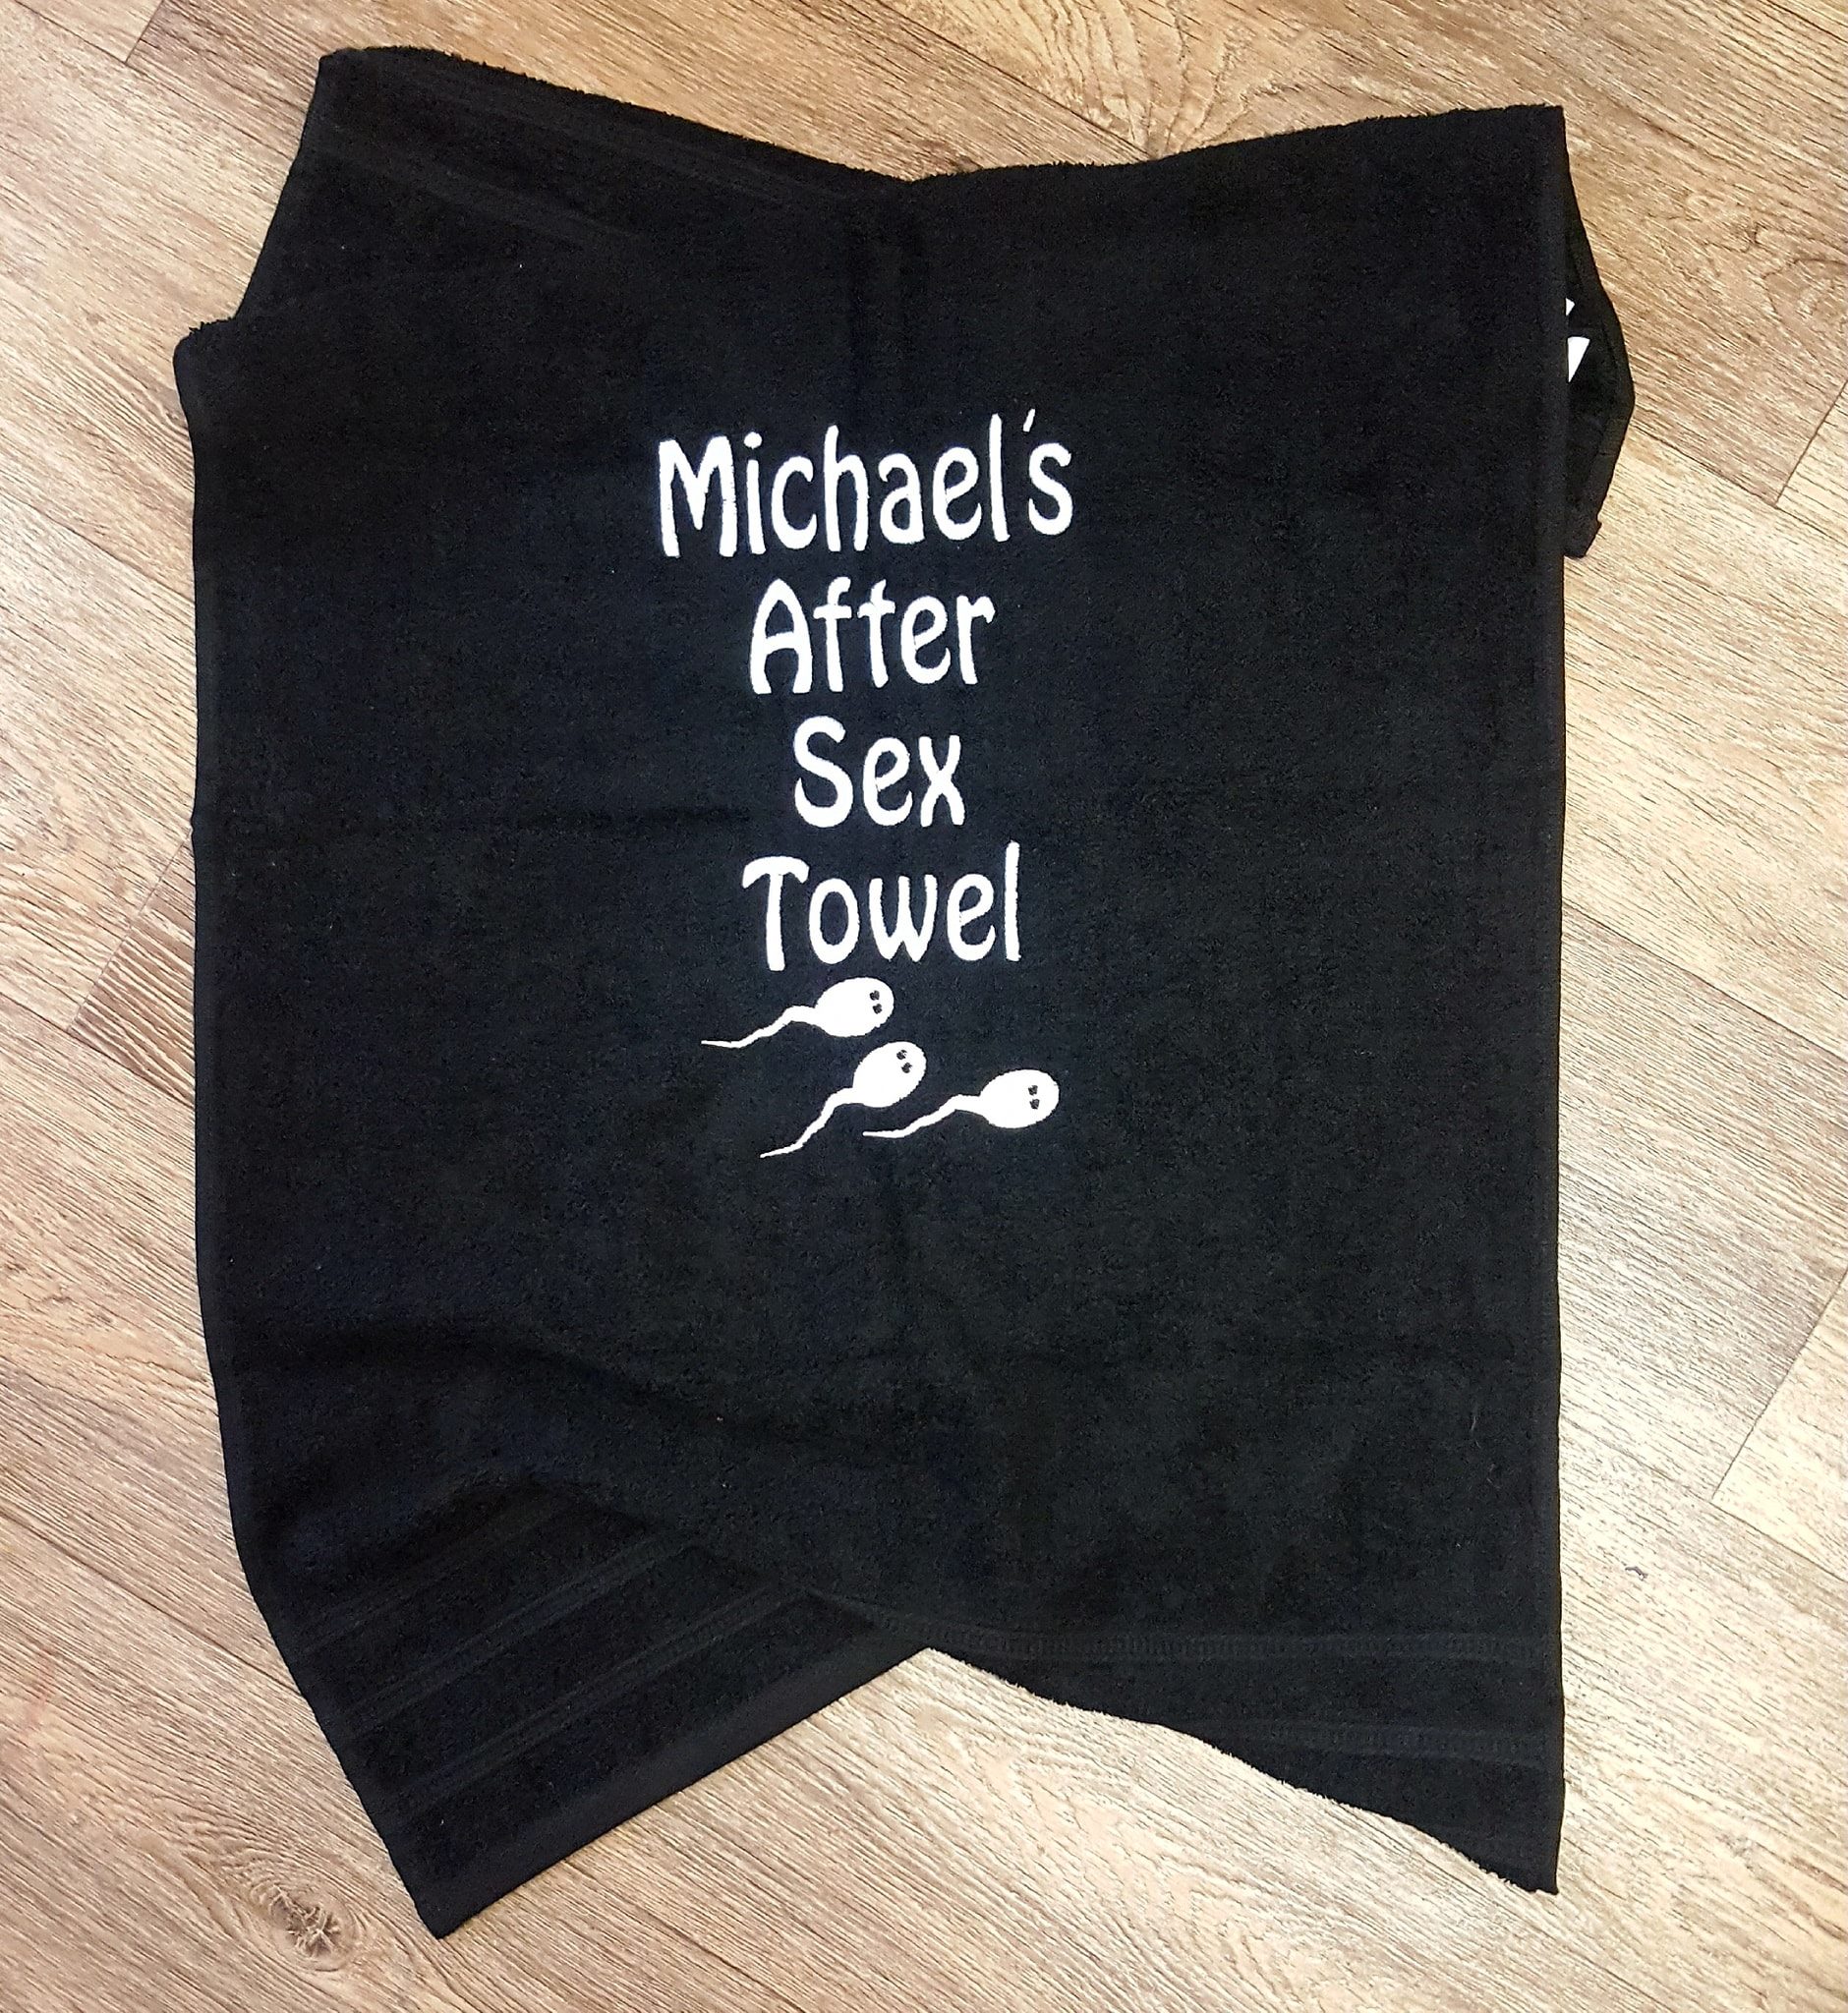 After Sex Embroidered Towel in black with white embroidered personalised name with sperm